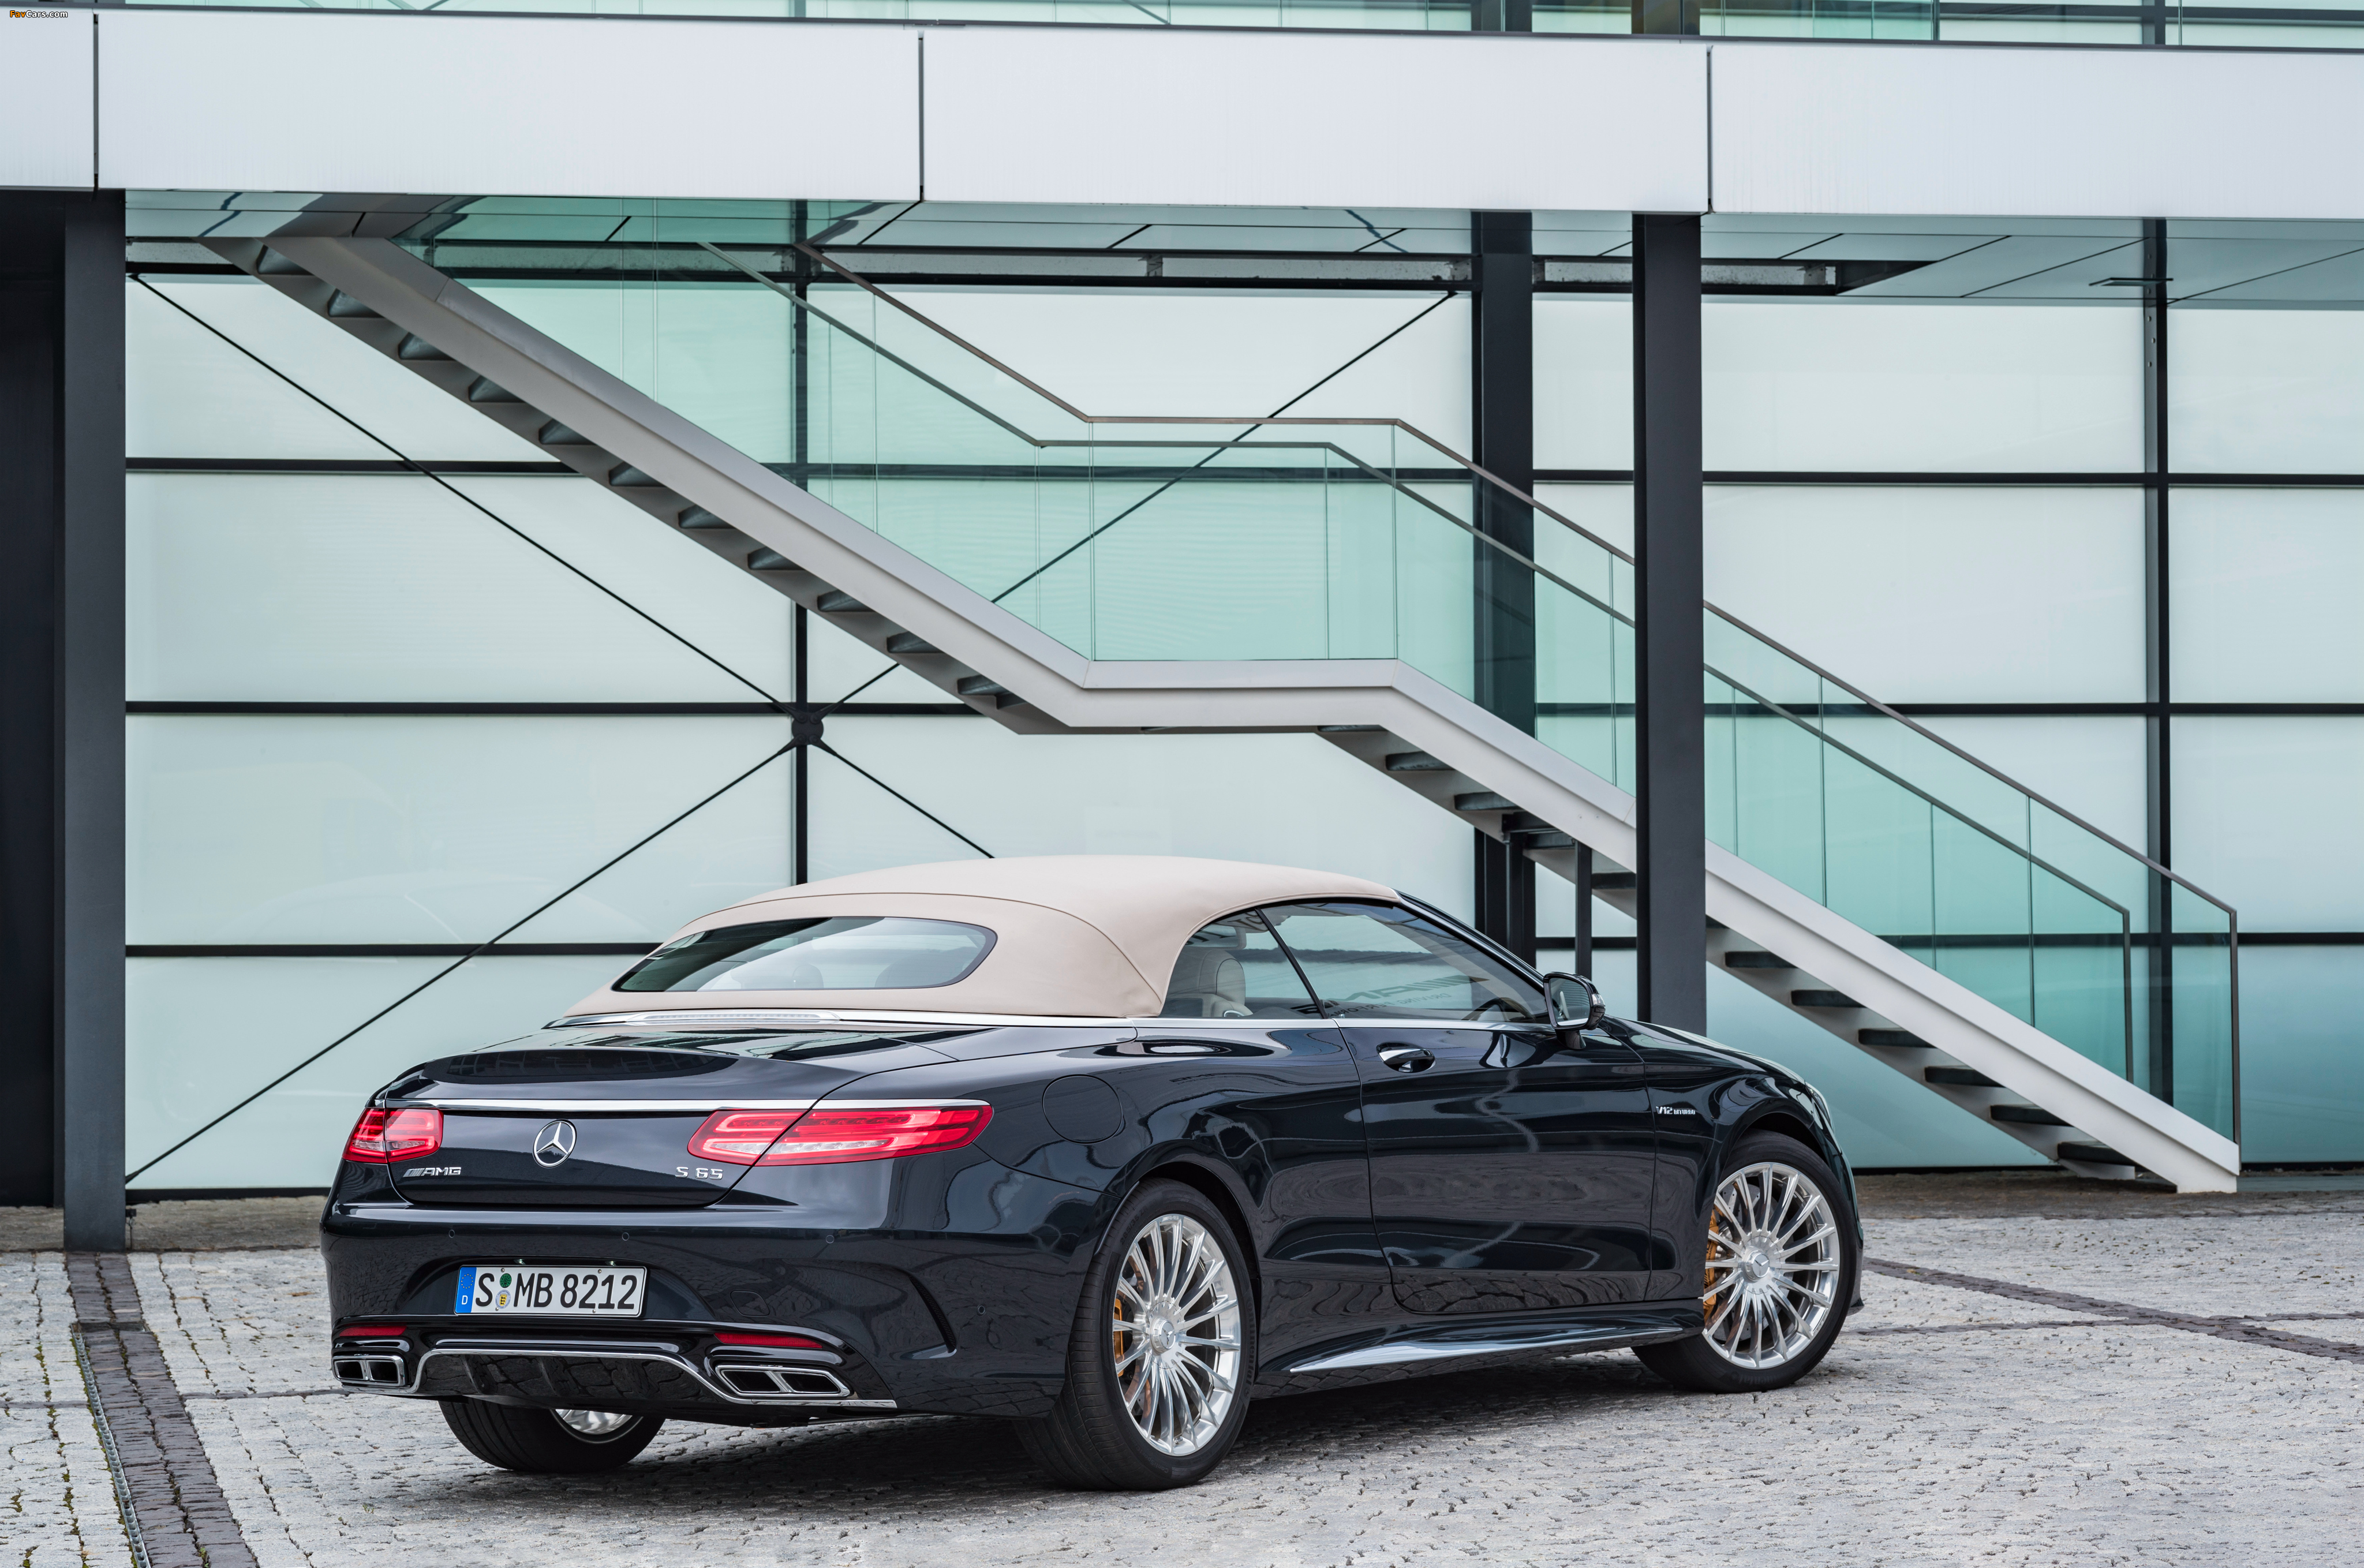 Mercedes-AMG S 65 Cabriolet (A217) 2016 wallpapers (4096 x 2717)